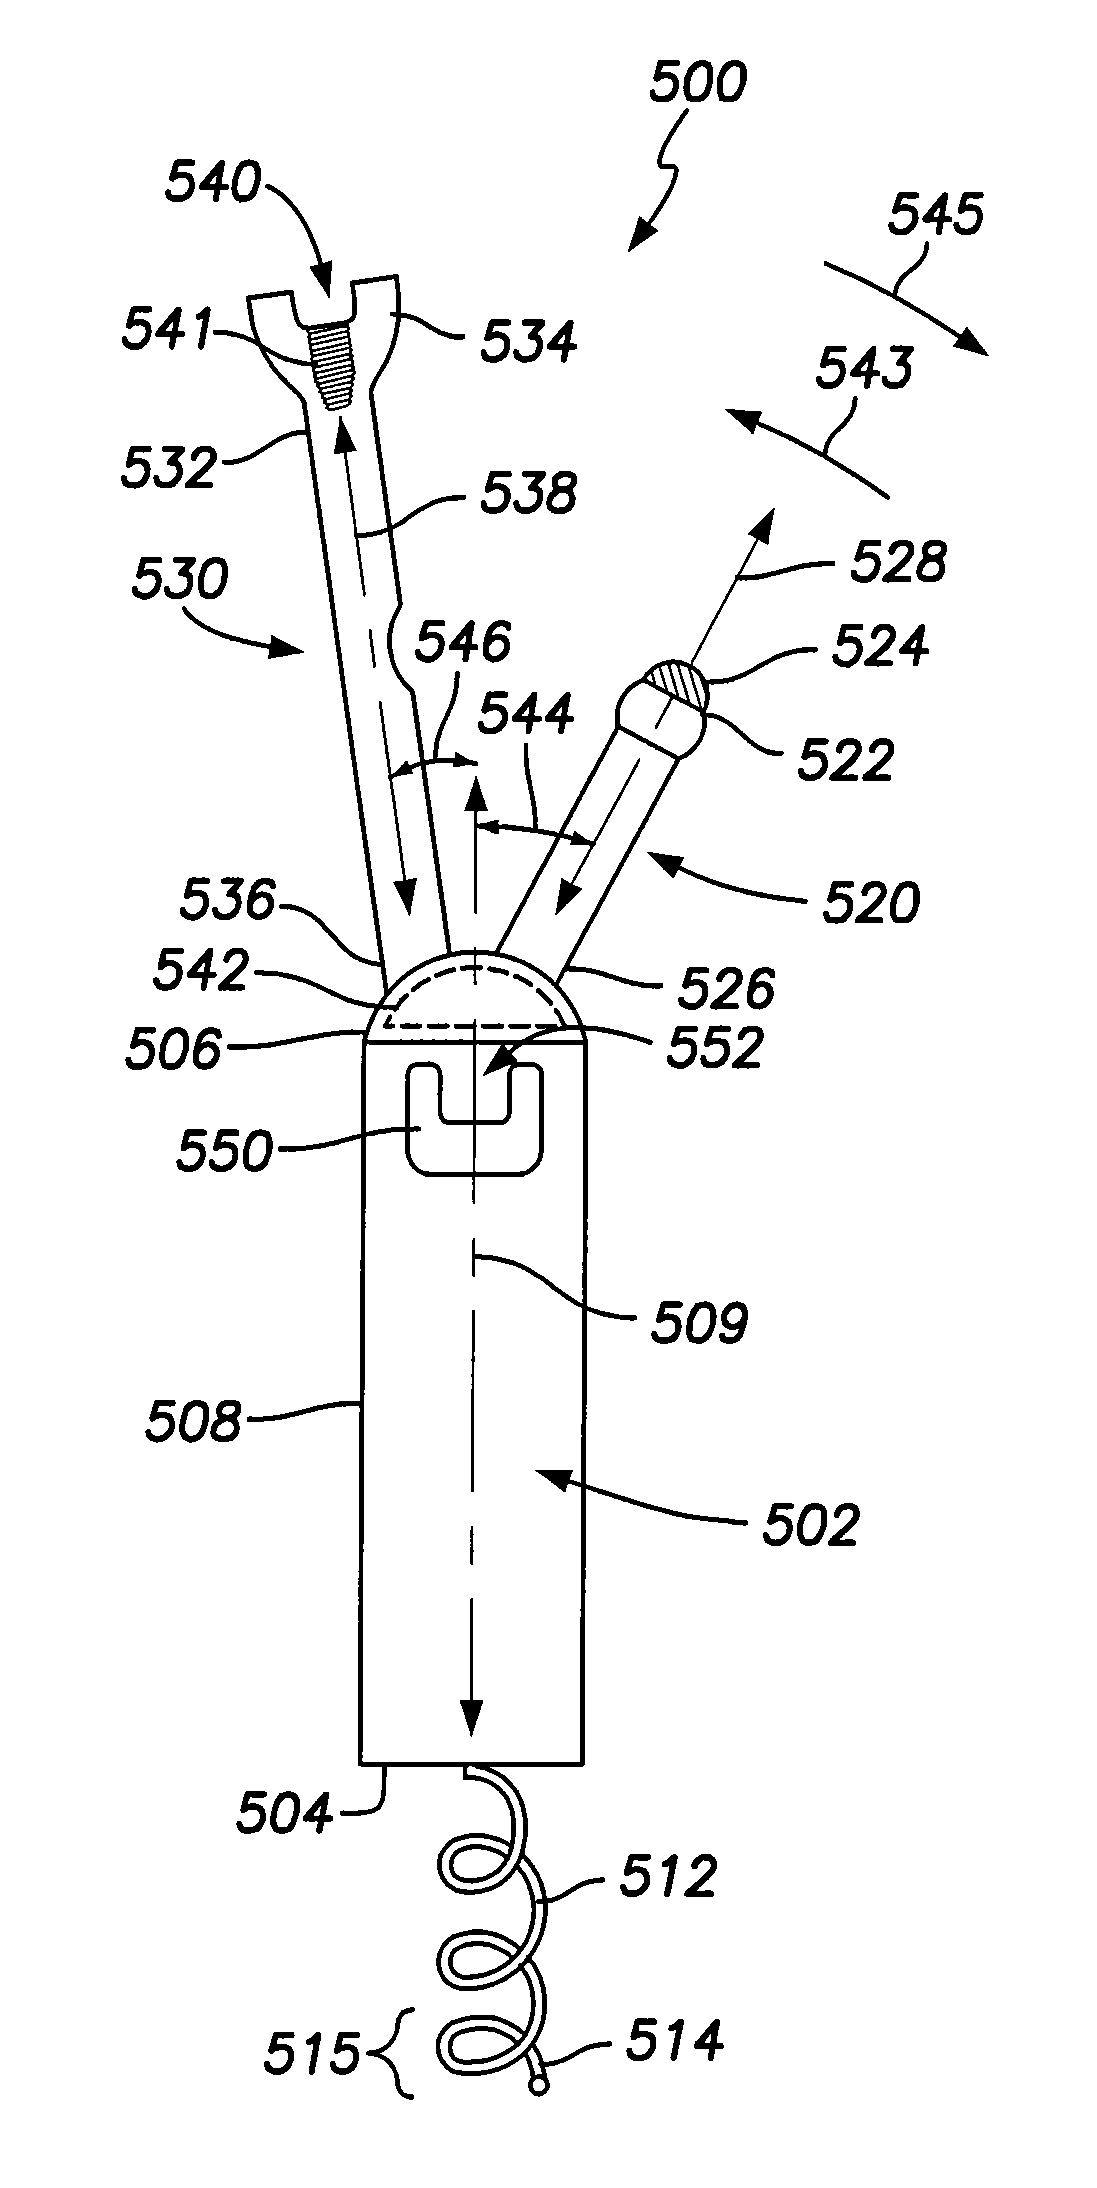 Single chamber leadless intra-cardiac medical device with dual-chamber functionality